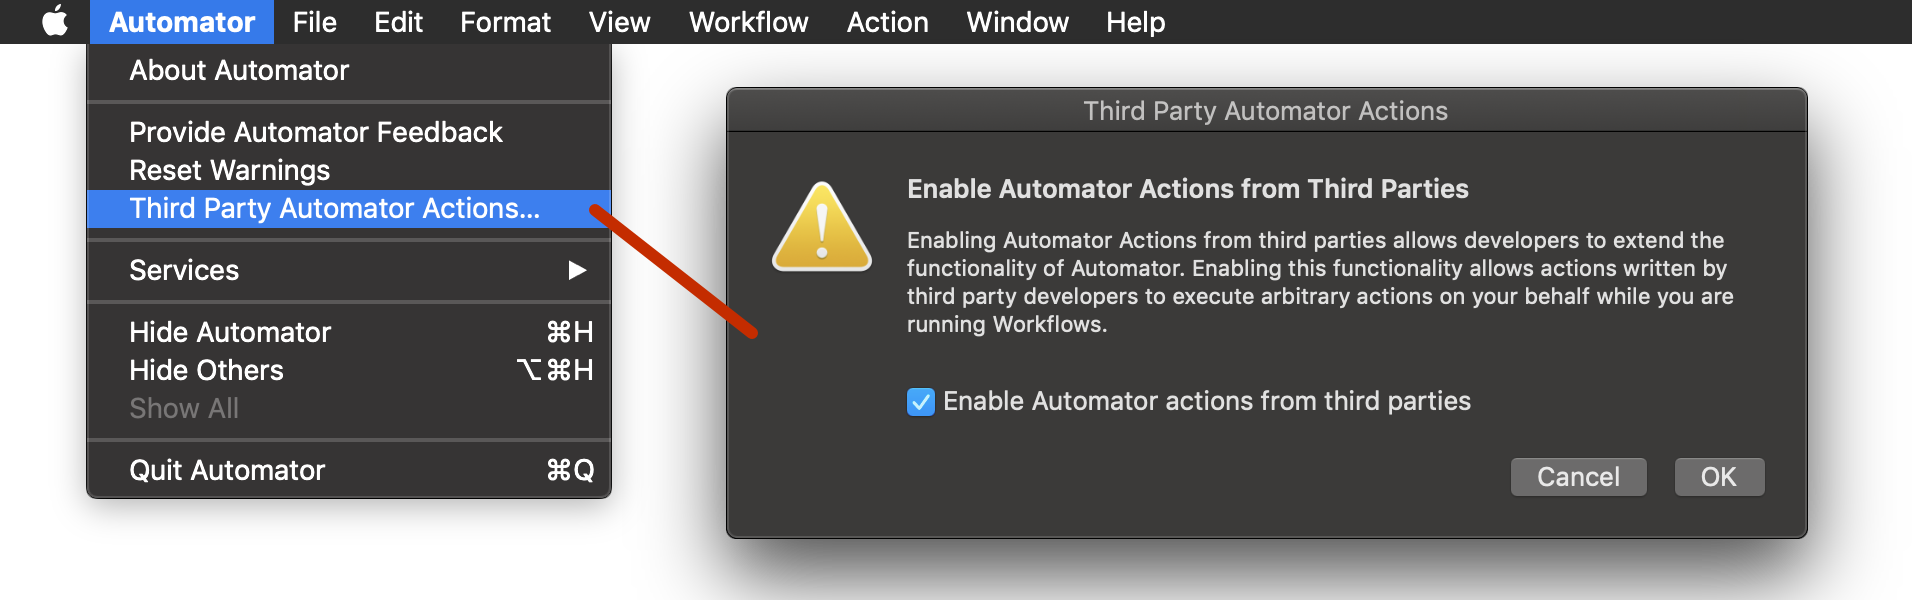 enable-3rd-party-actions